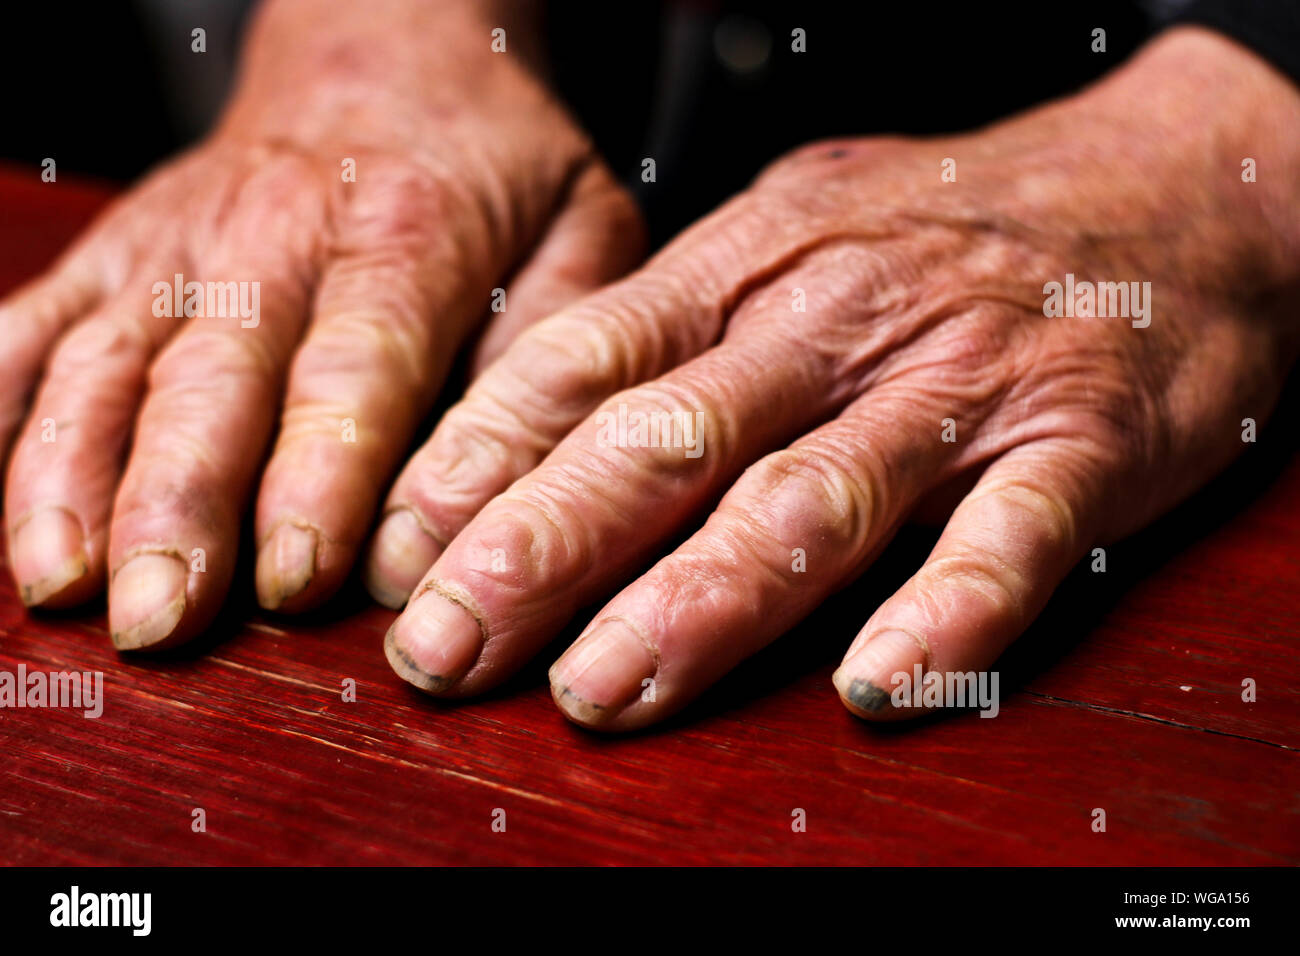 Cropped Hands Of Senior Adult On Table Stock Photo